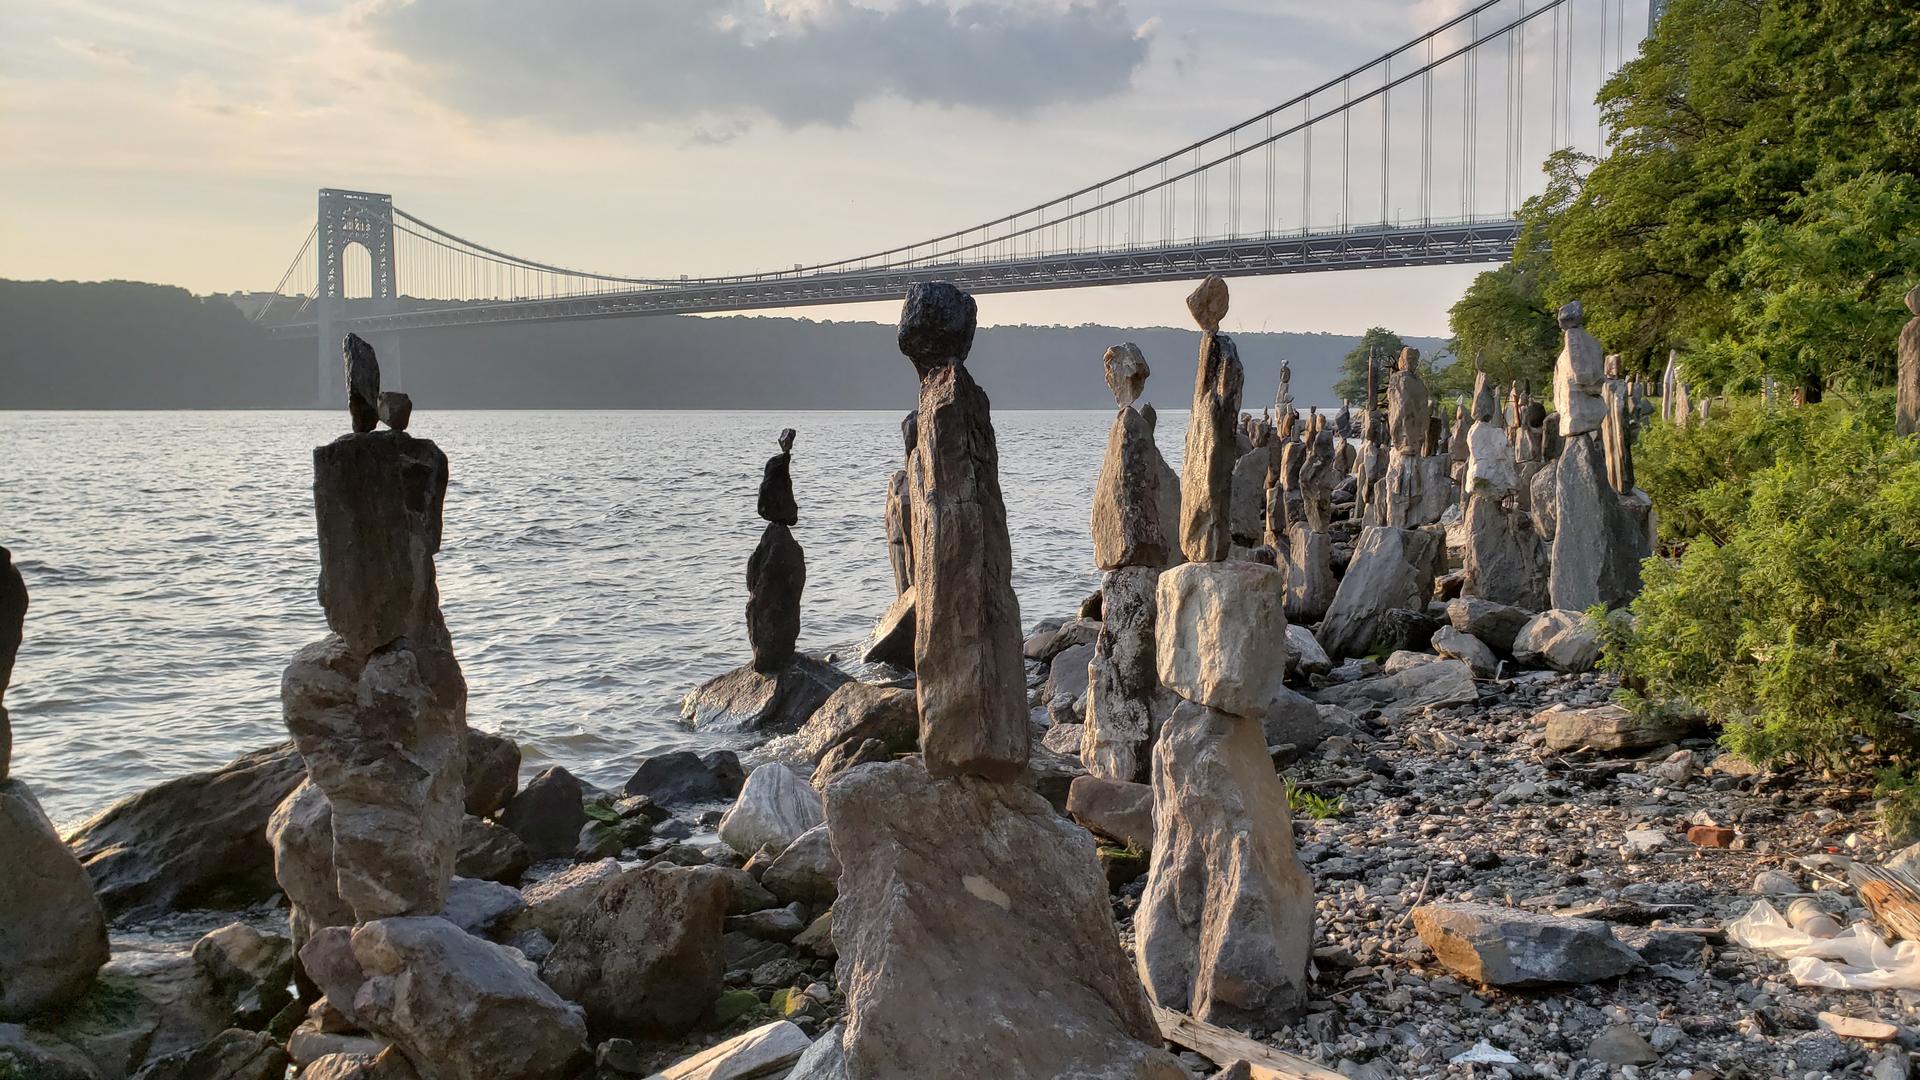 The Sisyphus Stones stretch out along the Hudson in Manhattan. They're the work of one man, Uliks Gryka, who has spent hours almost every day, erecting and maintaining them.